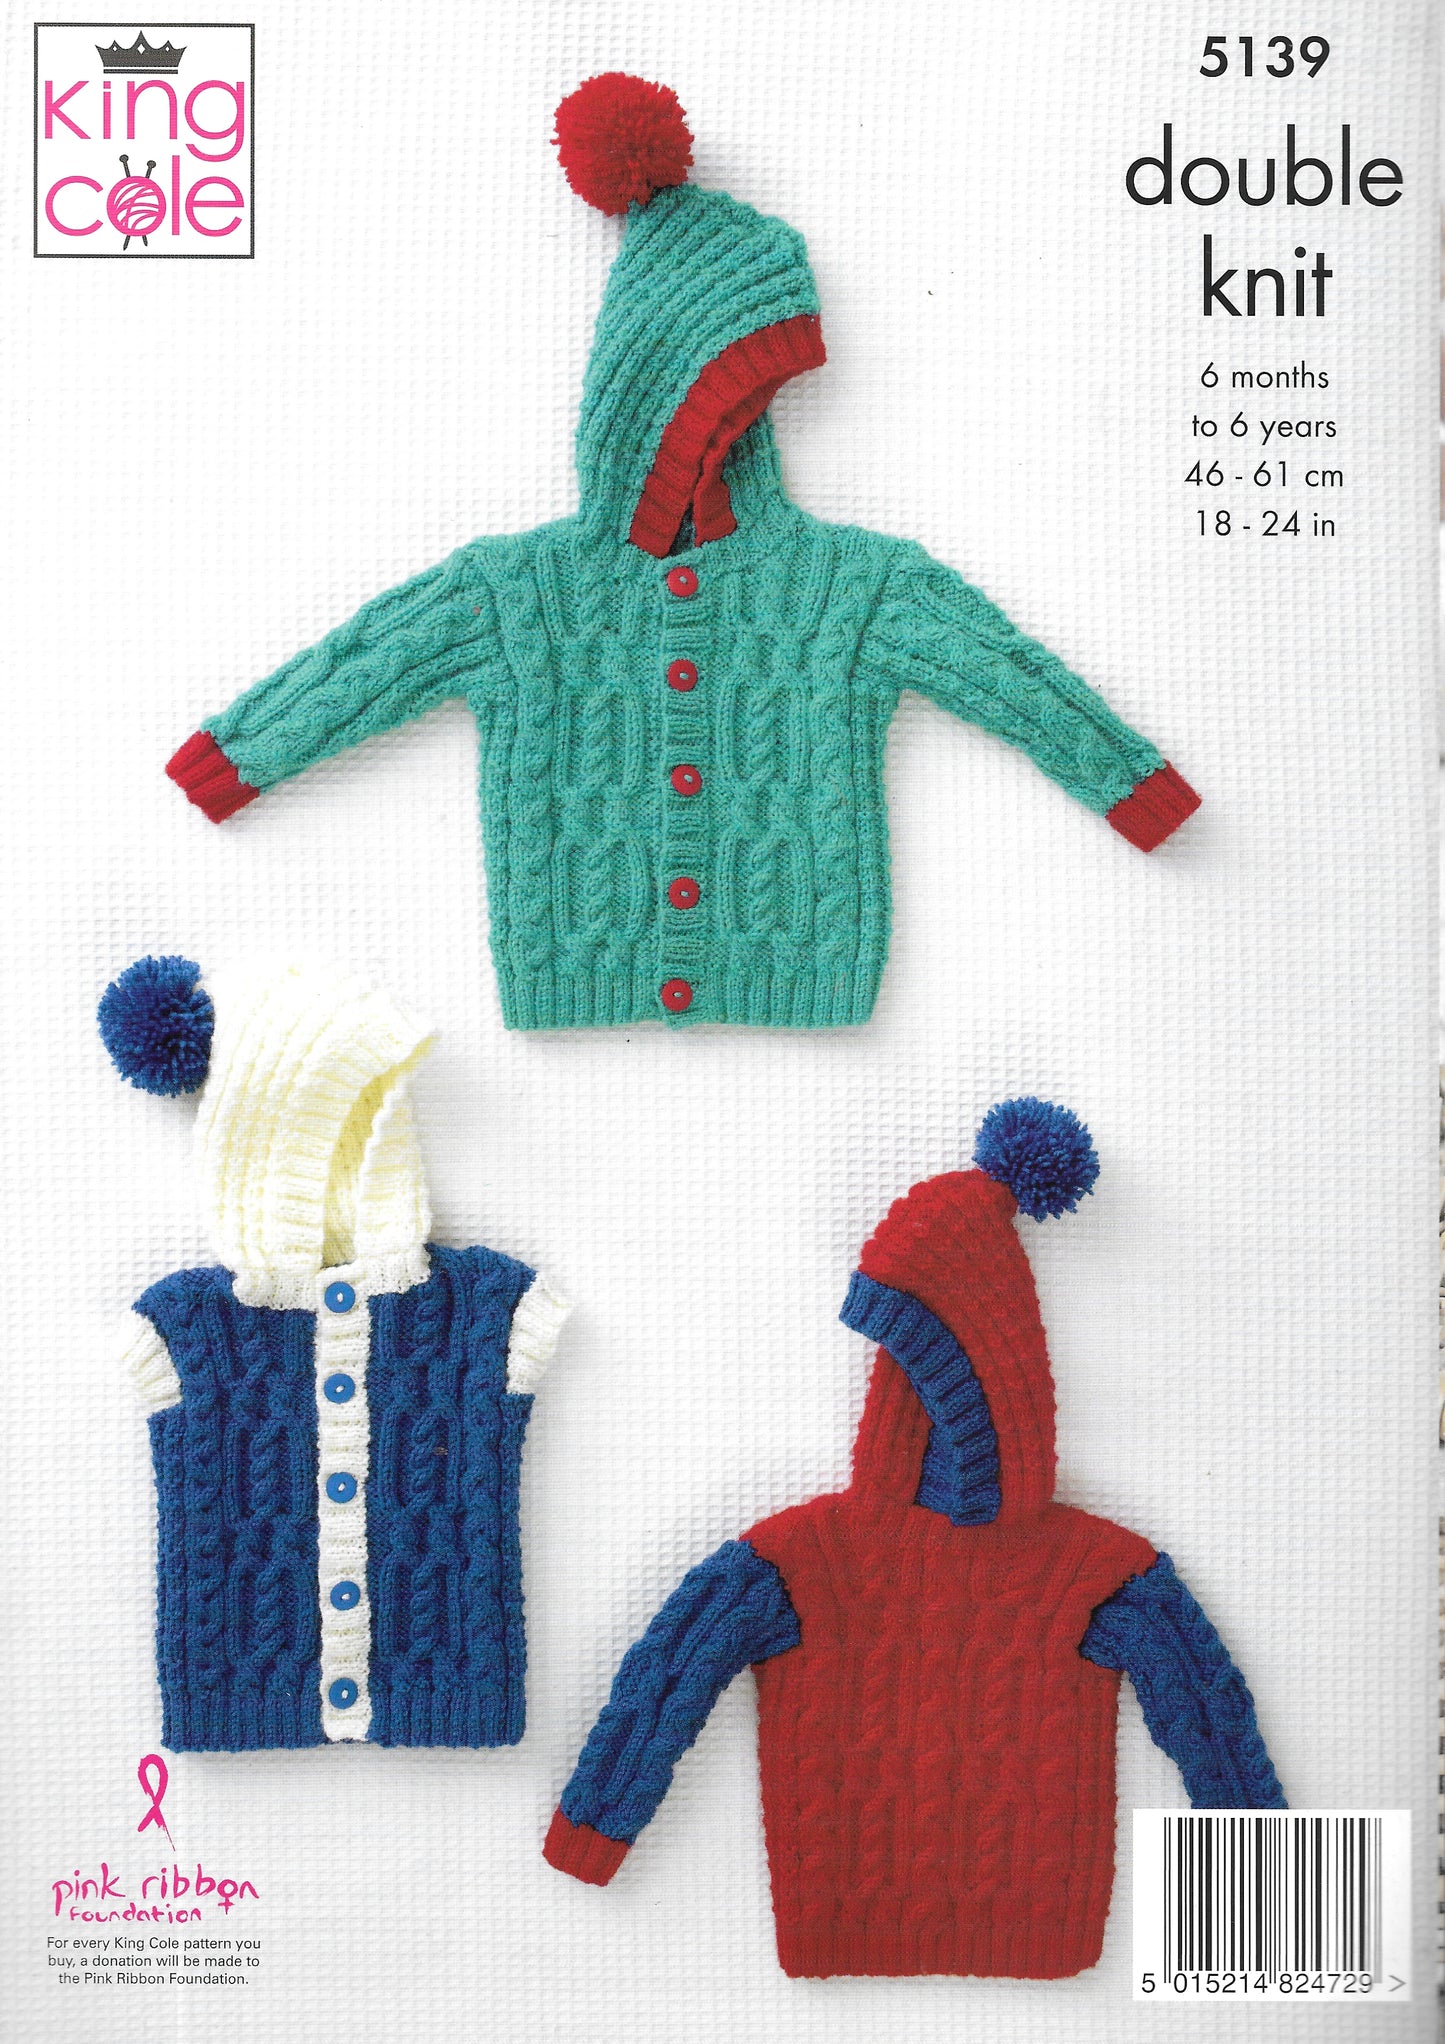 5139 King Cole double knit Jacket, Sweater and Gilet knitting pattern